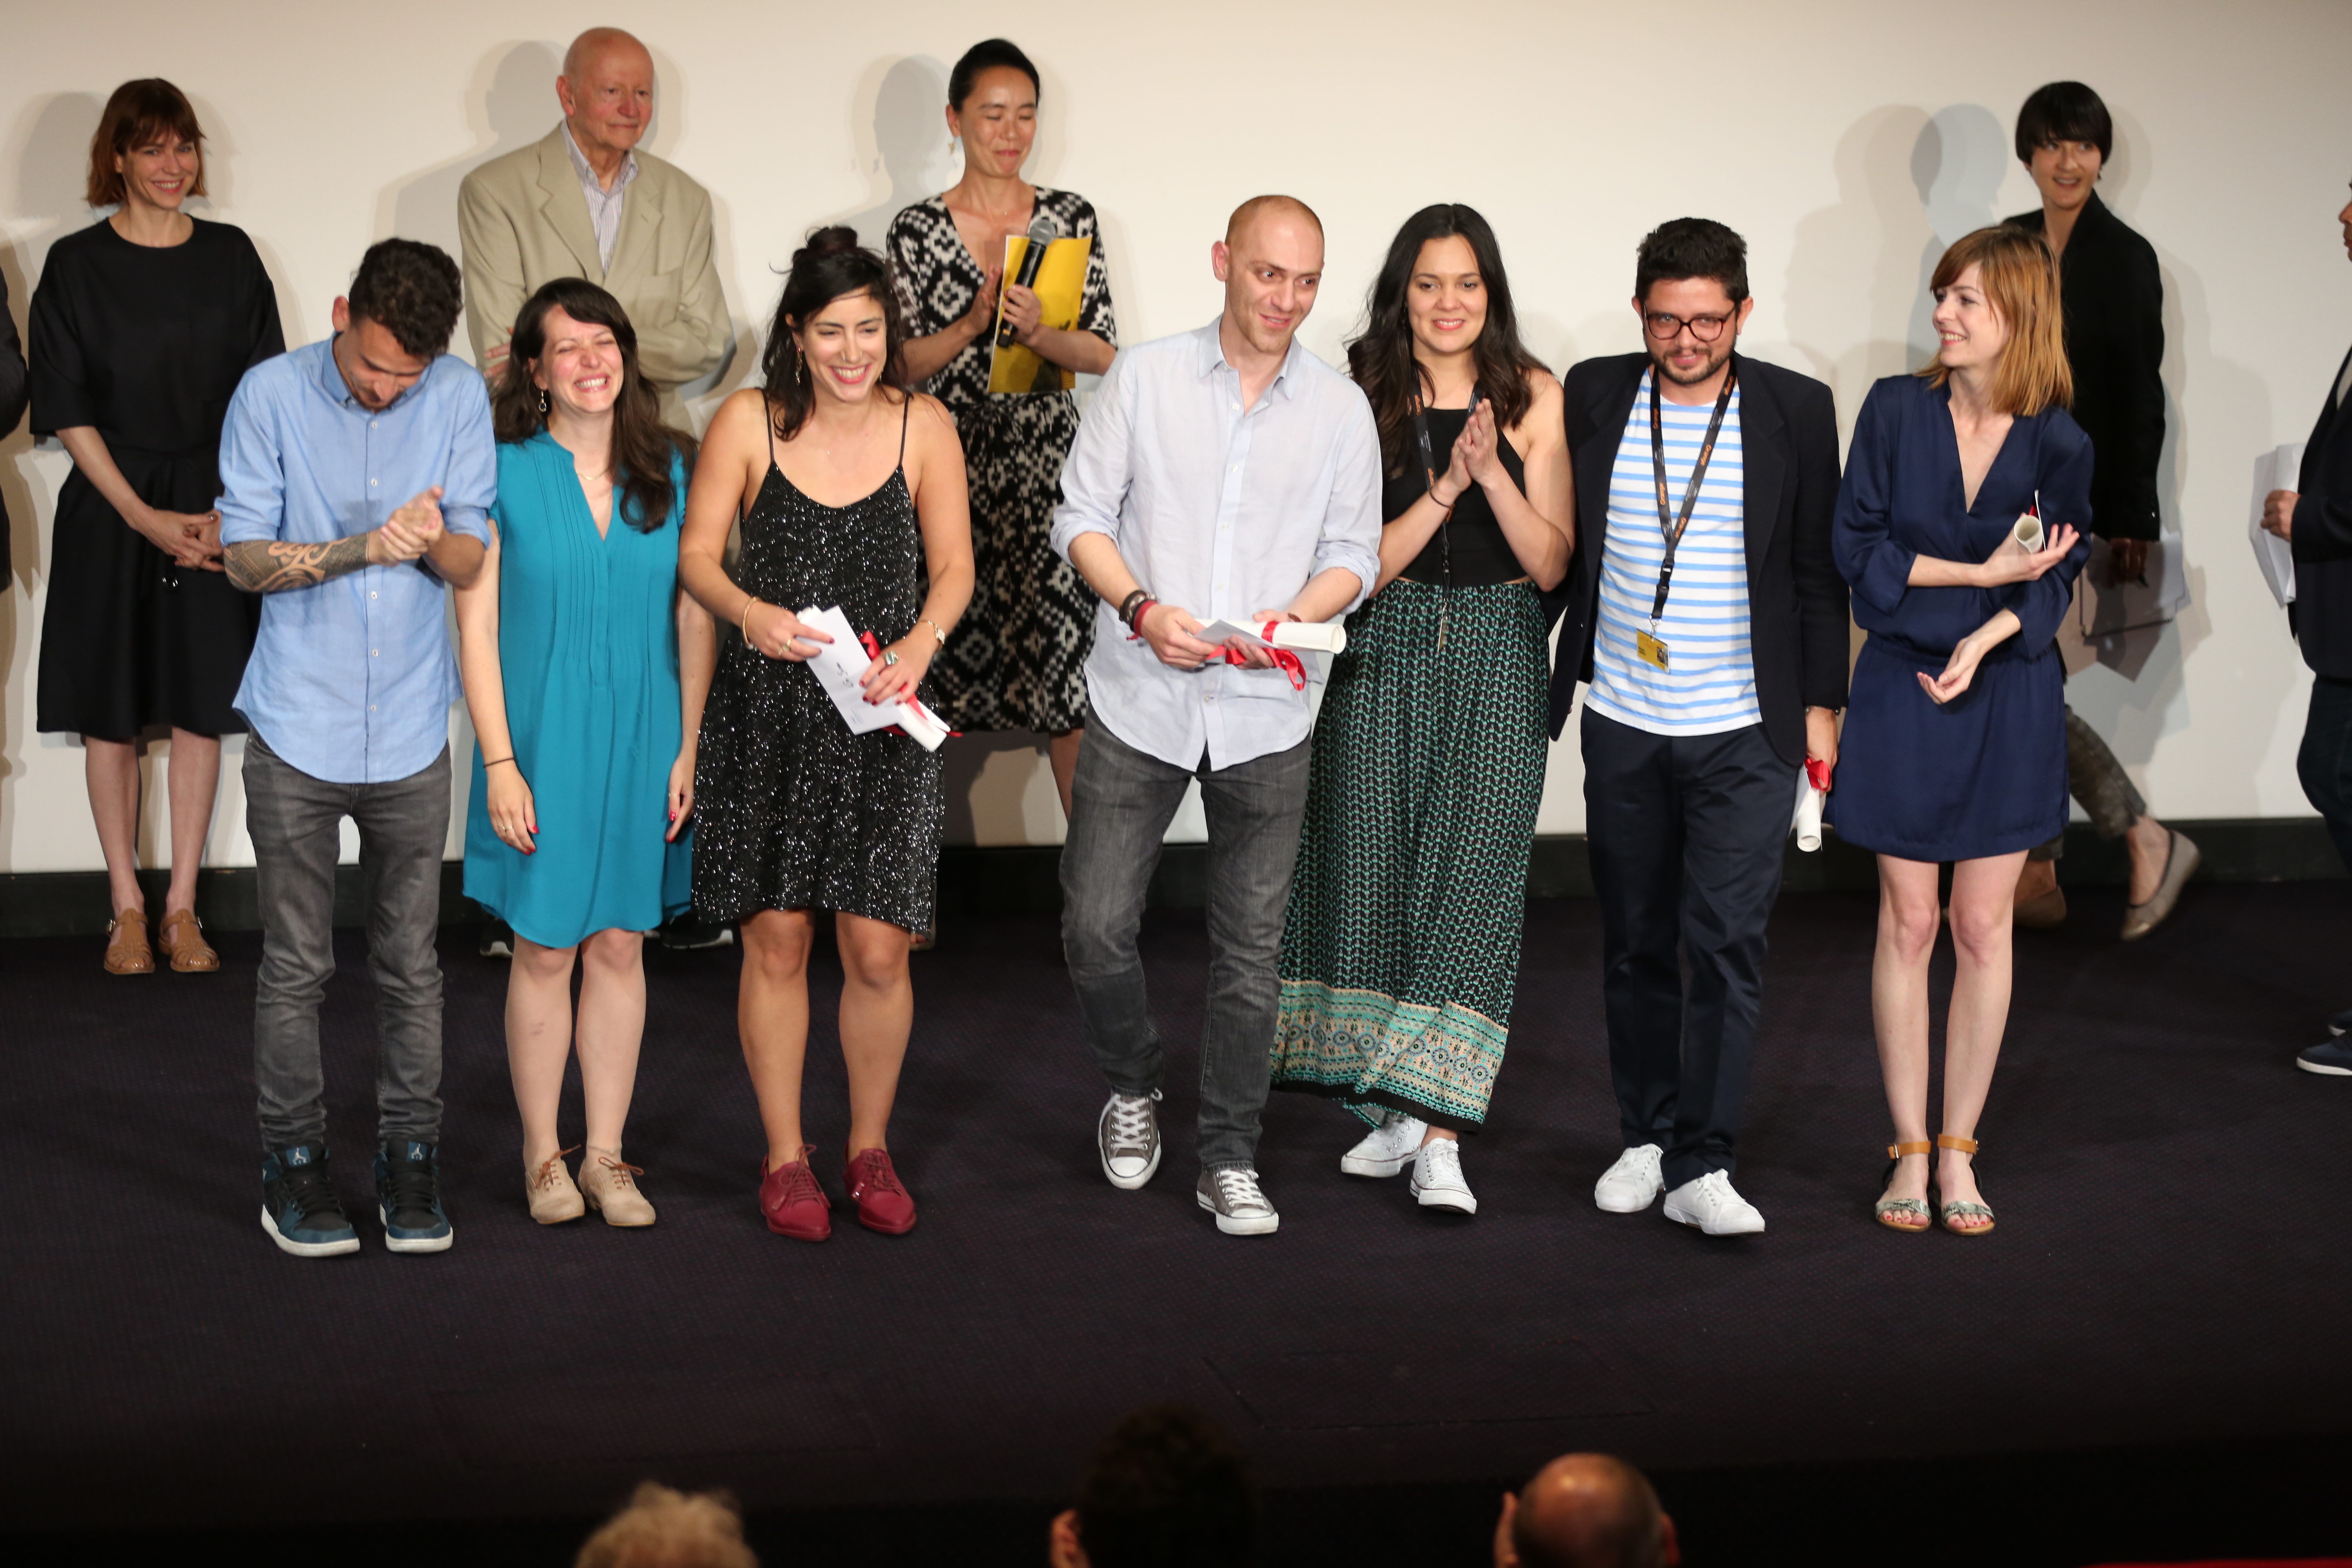 Gilles Jacob on stage with the winners of the 2016 Cinéfondation Awards: Or Sinai, Hamid Ahmadi, Michael Labarca and Nadja Andrasev